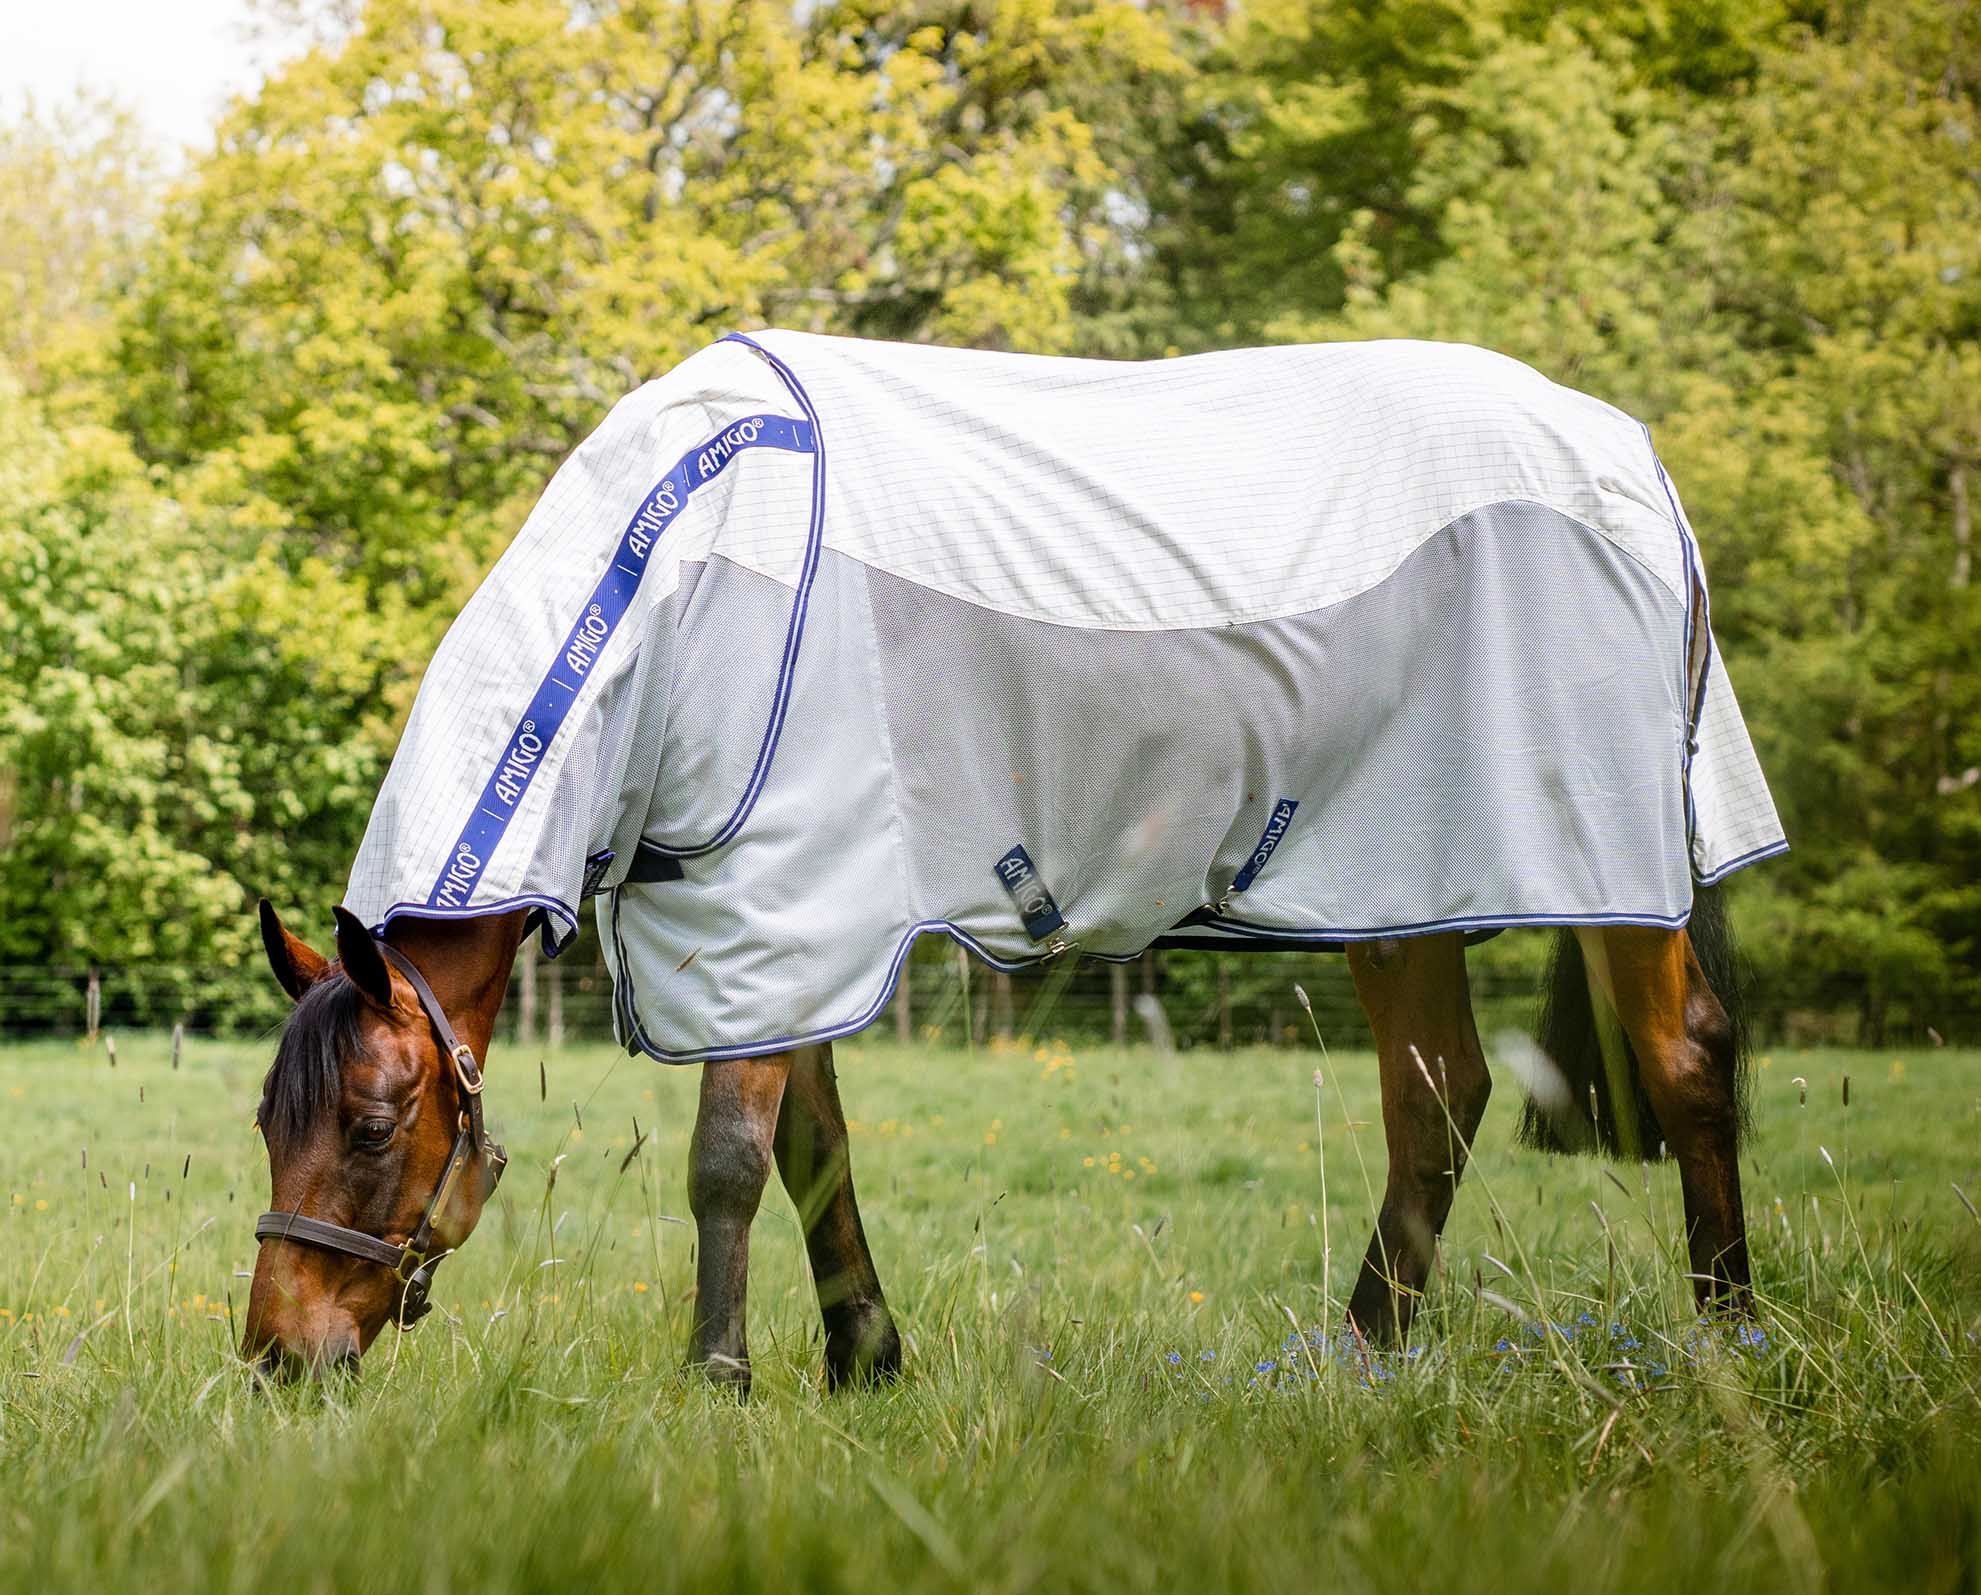 The Best Fly Protection for Horses - Countryside